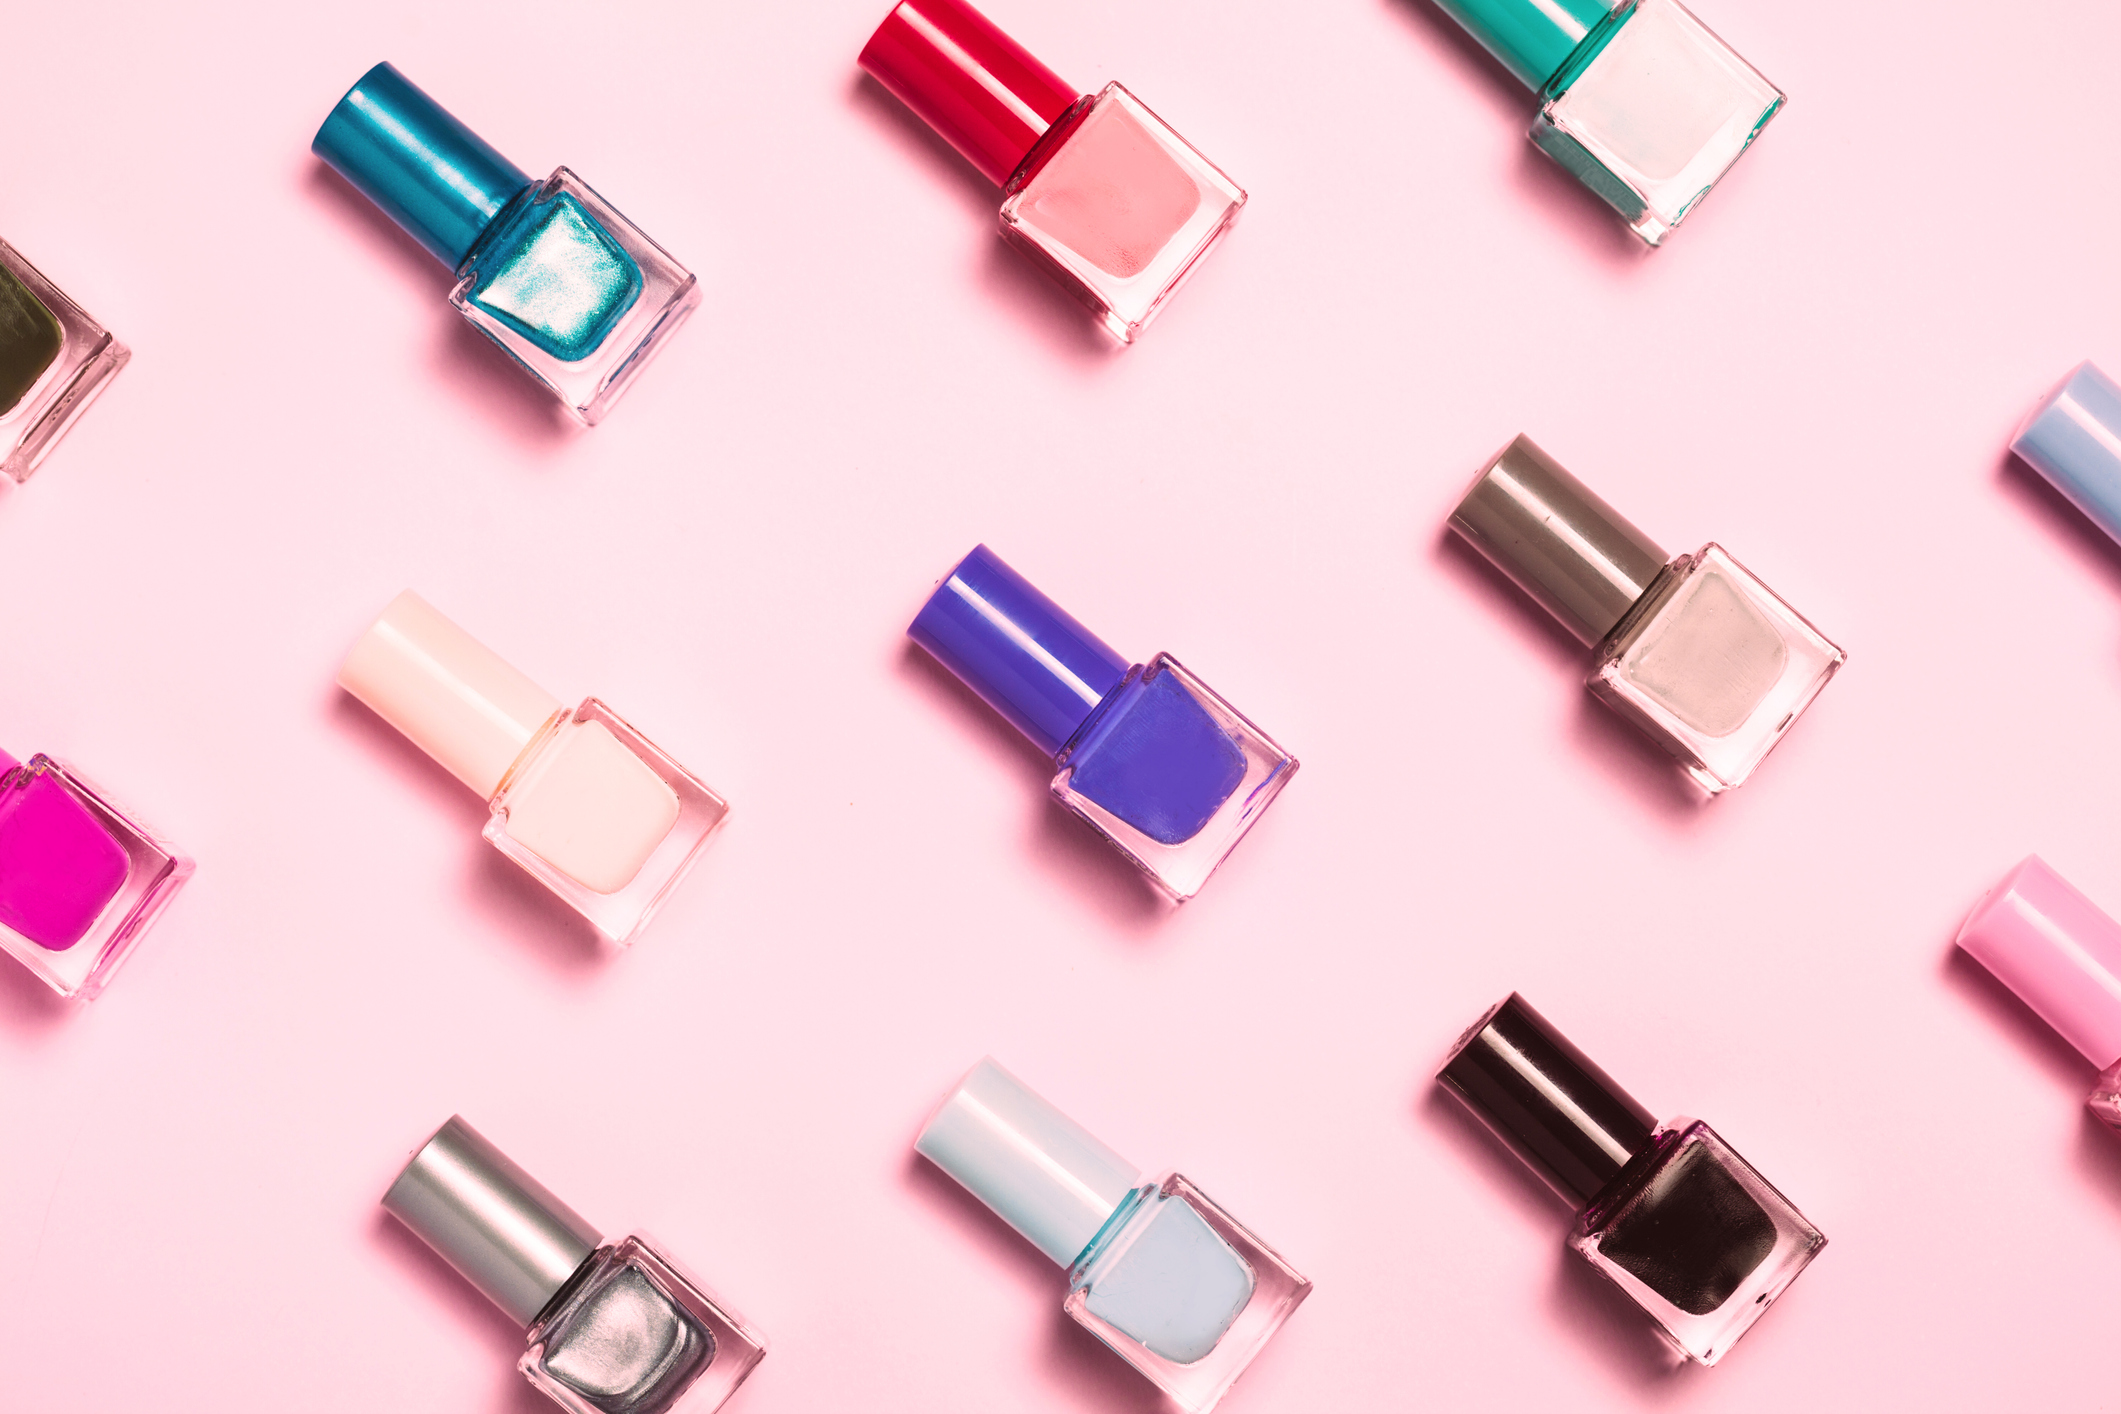 9. "Summer 19 Nail Colors for Every Skin Tone" - wide 6